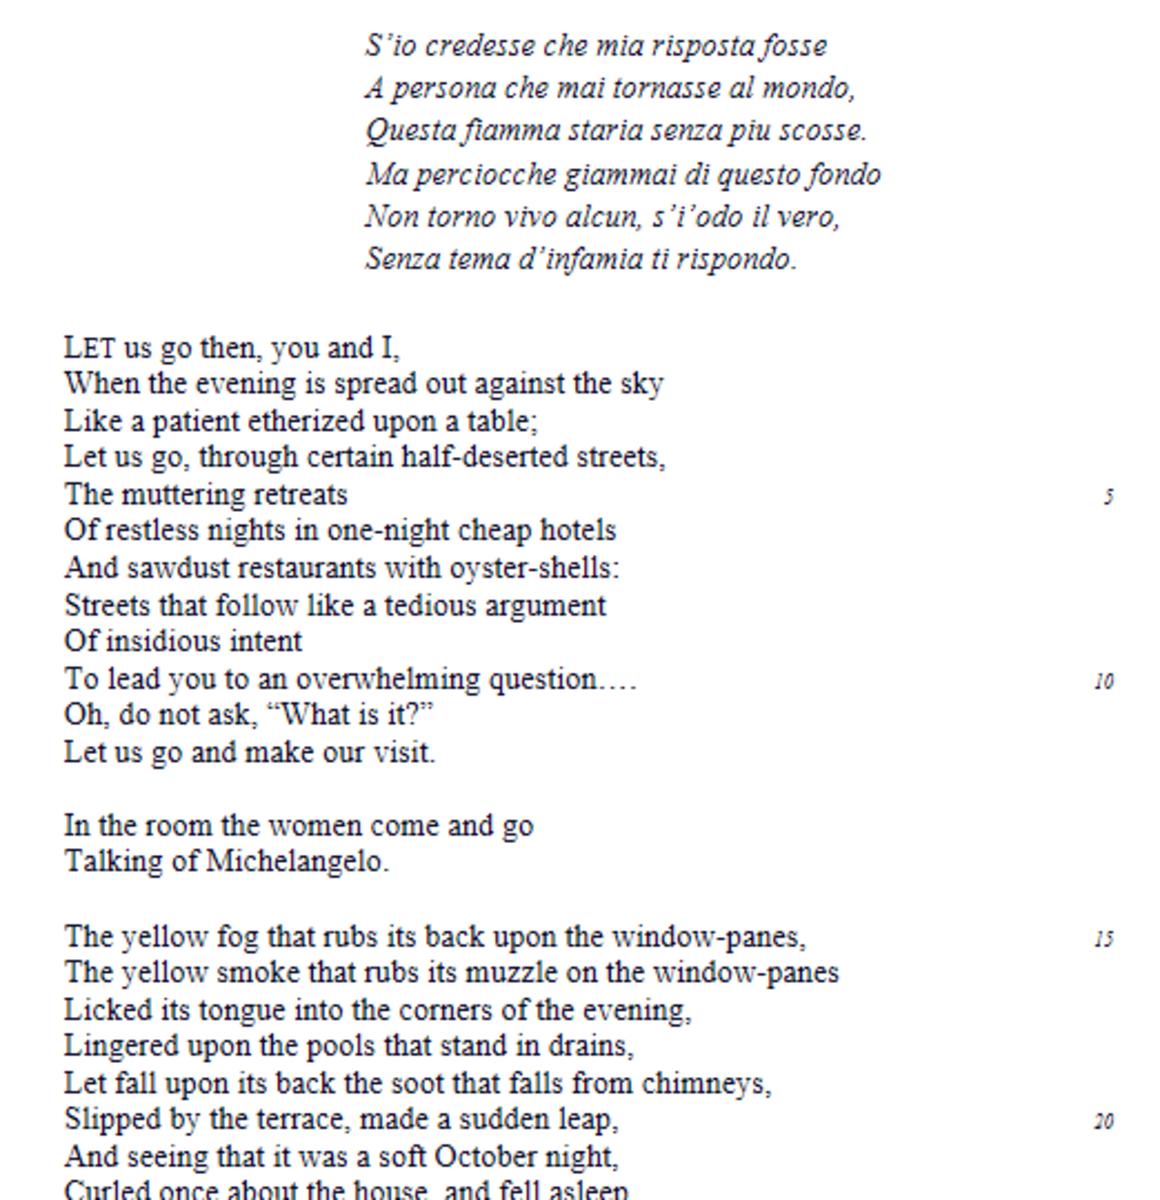 analysis-of-poem-the-love-song-of-j-alfred-prufrock-by-ts-eliot